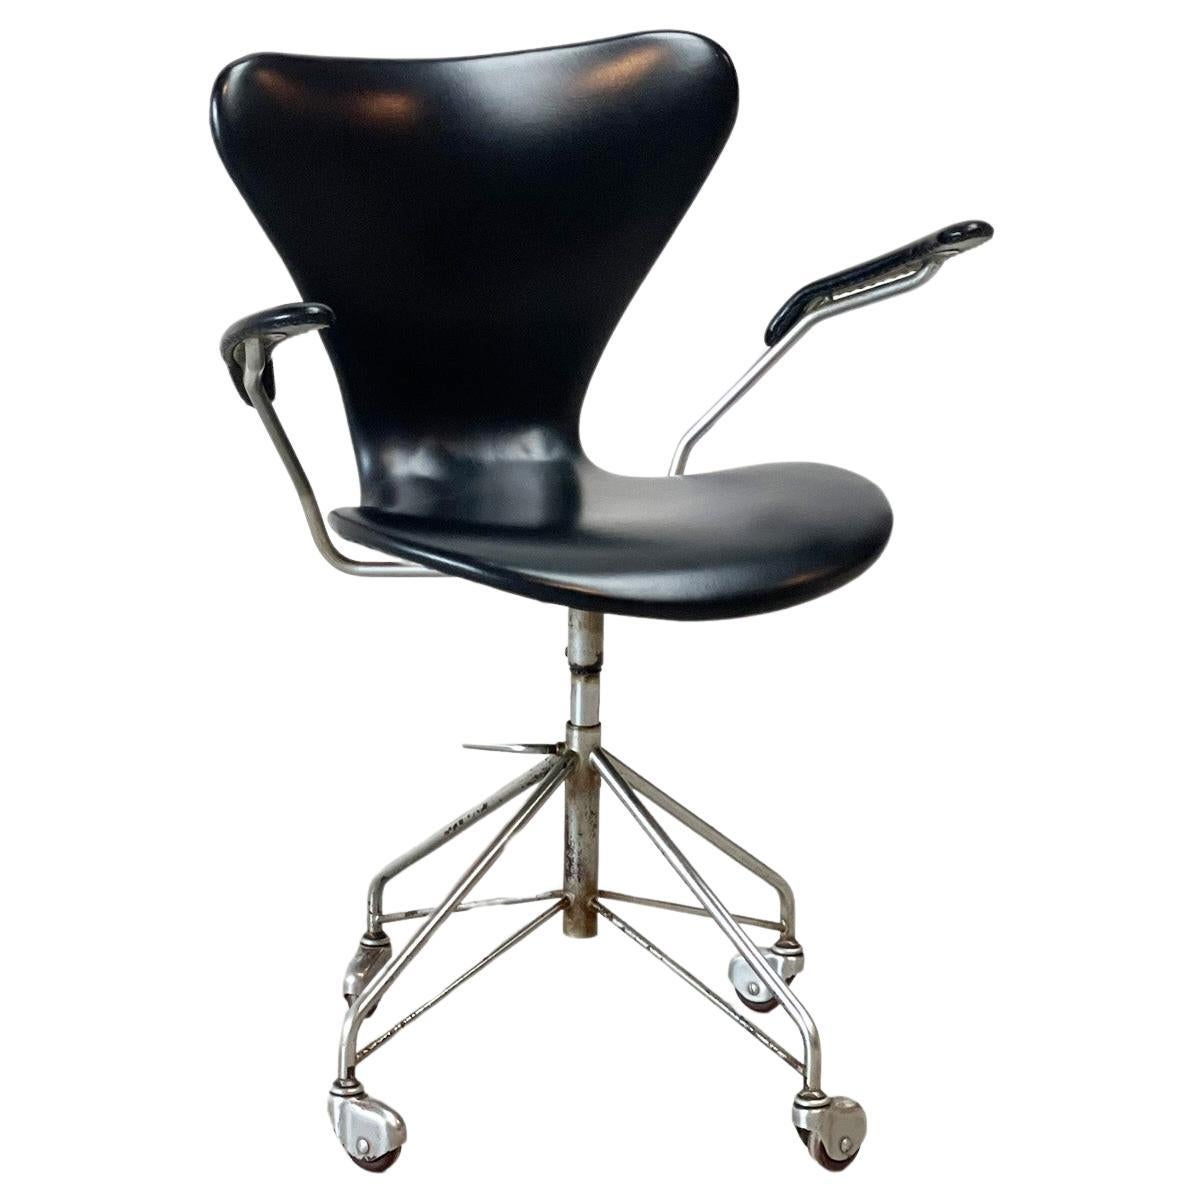 Early 3217 office chair by Arne Jacobsen For Sale